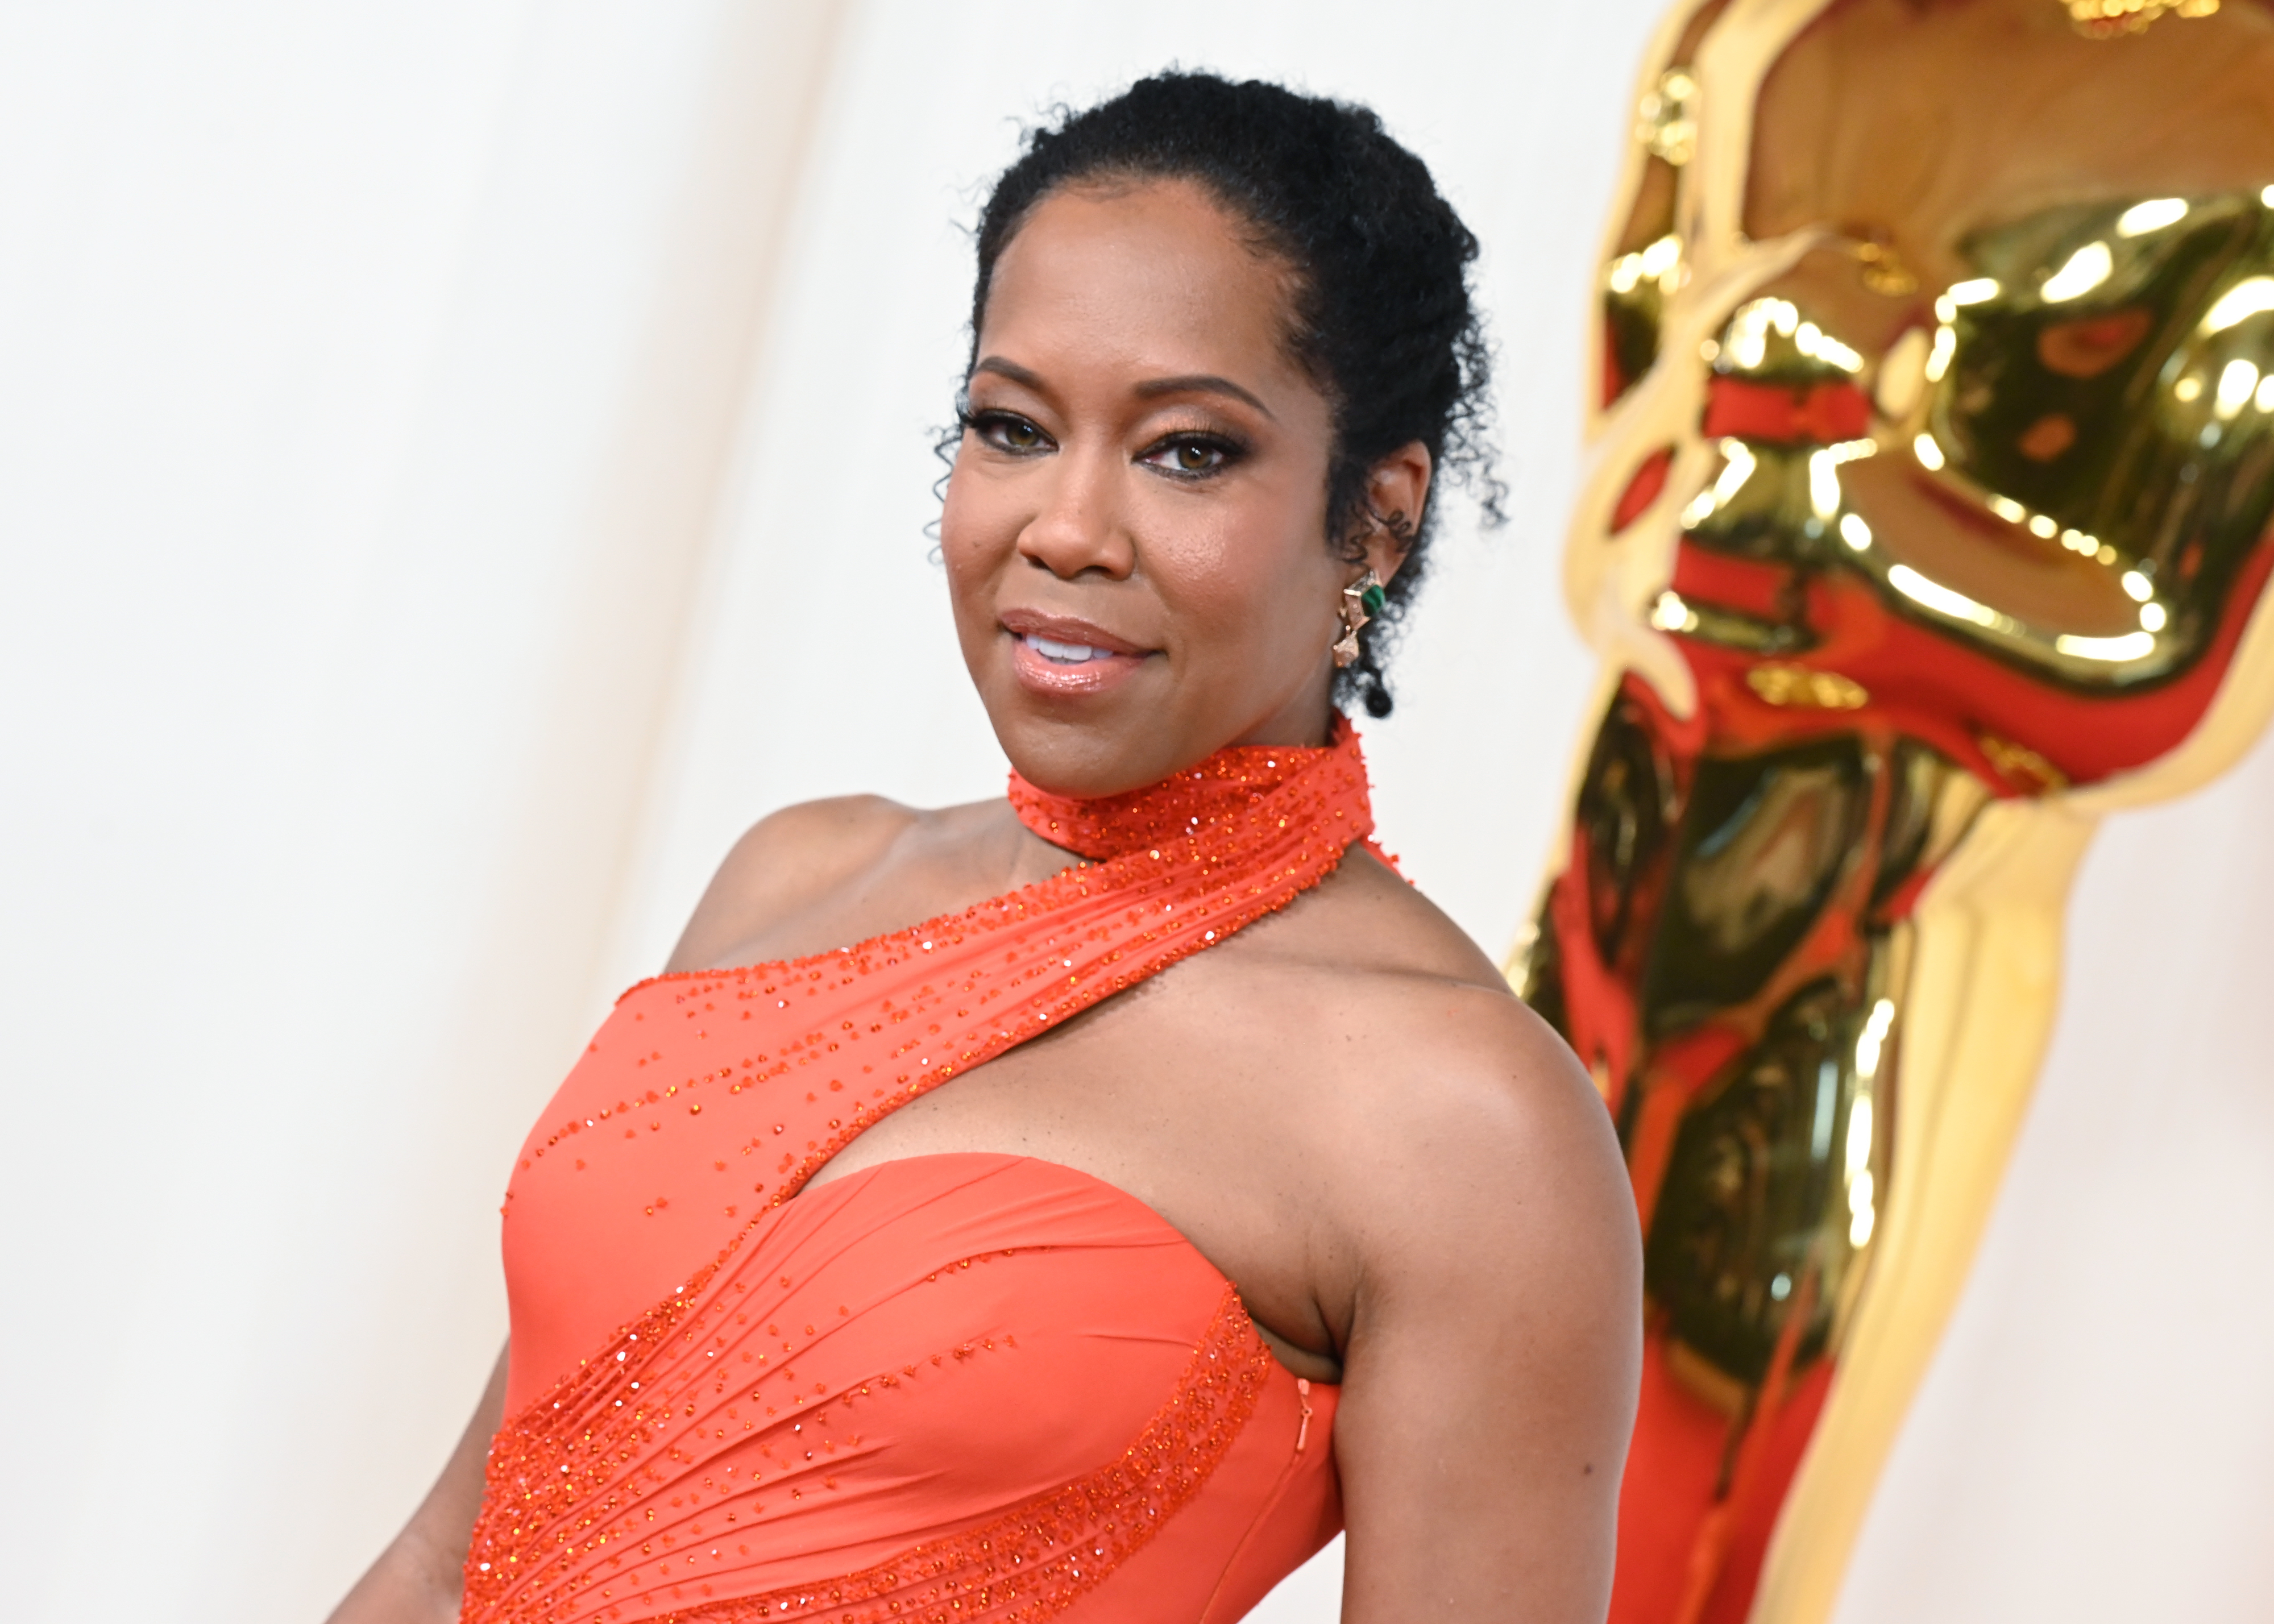 Regina King in a one-shoulder, beaded gown at an awards event